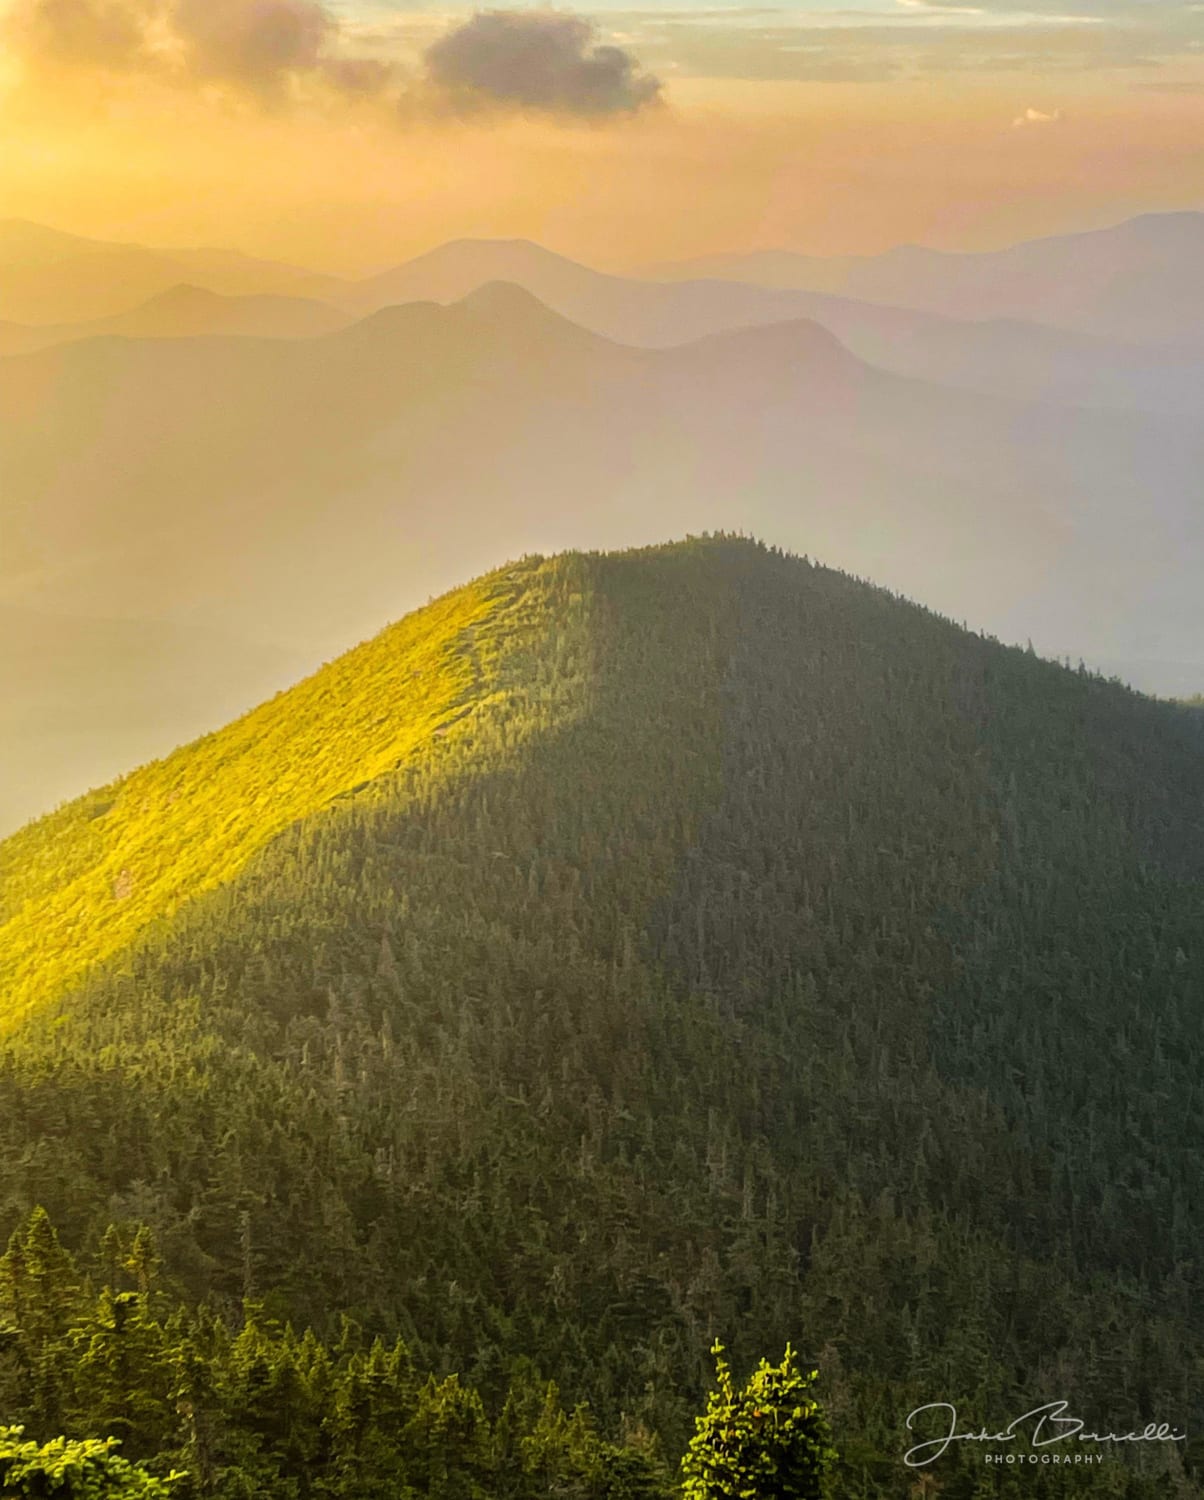 Signal ridge shortly after sunrise. From Mt. Carrigain in The White Mountains, New Hampshire (June 2021)